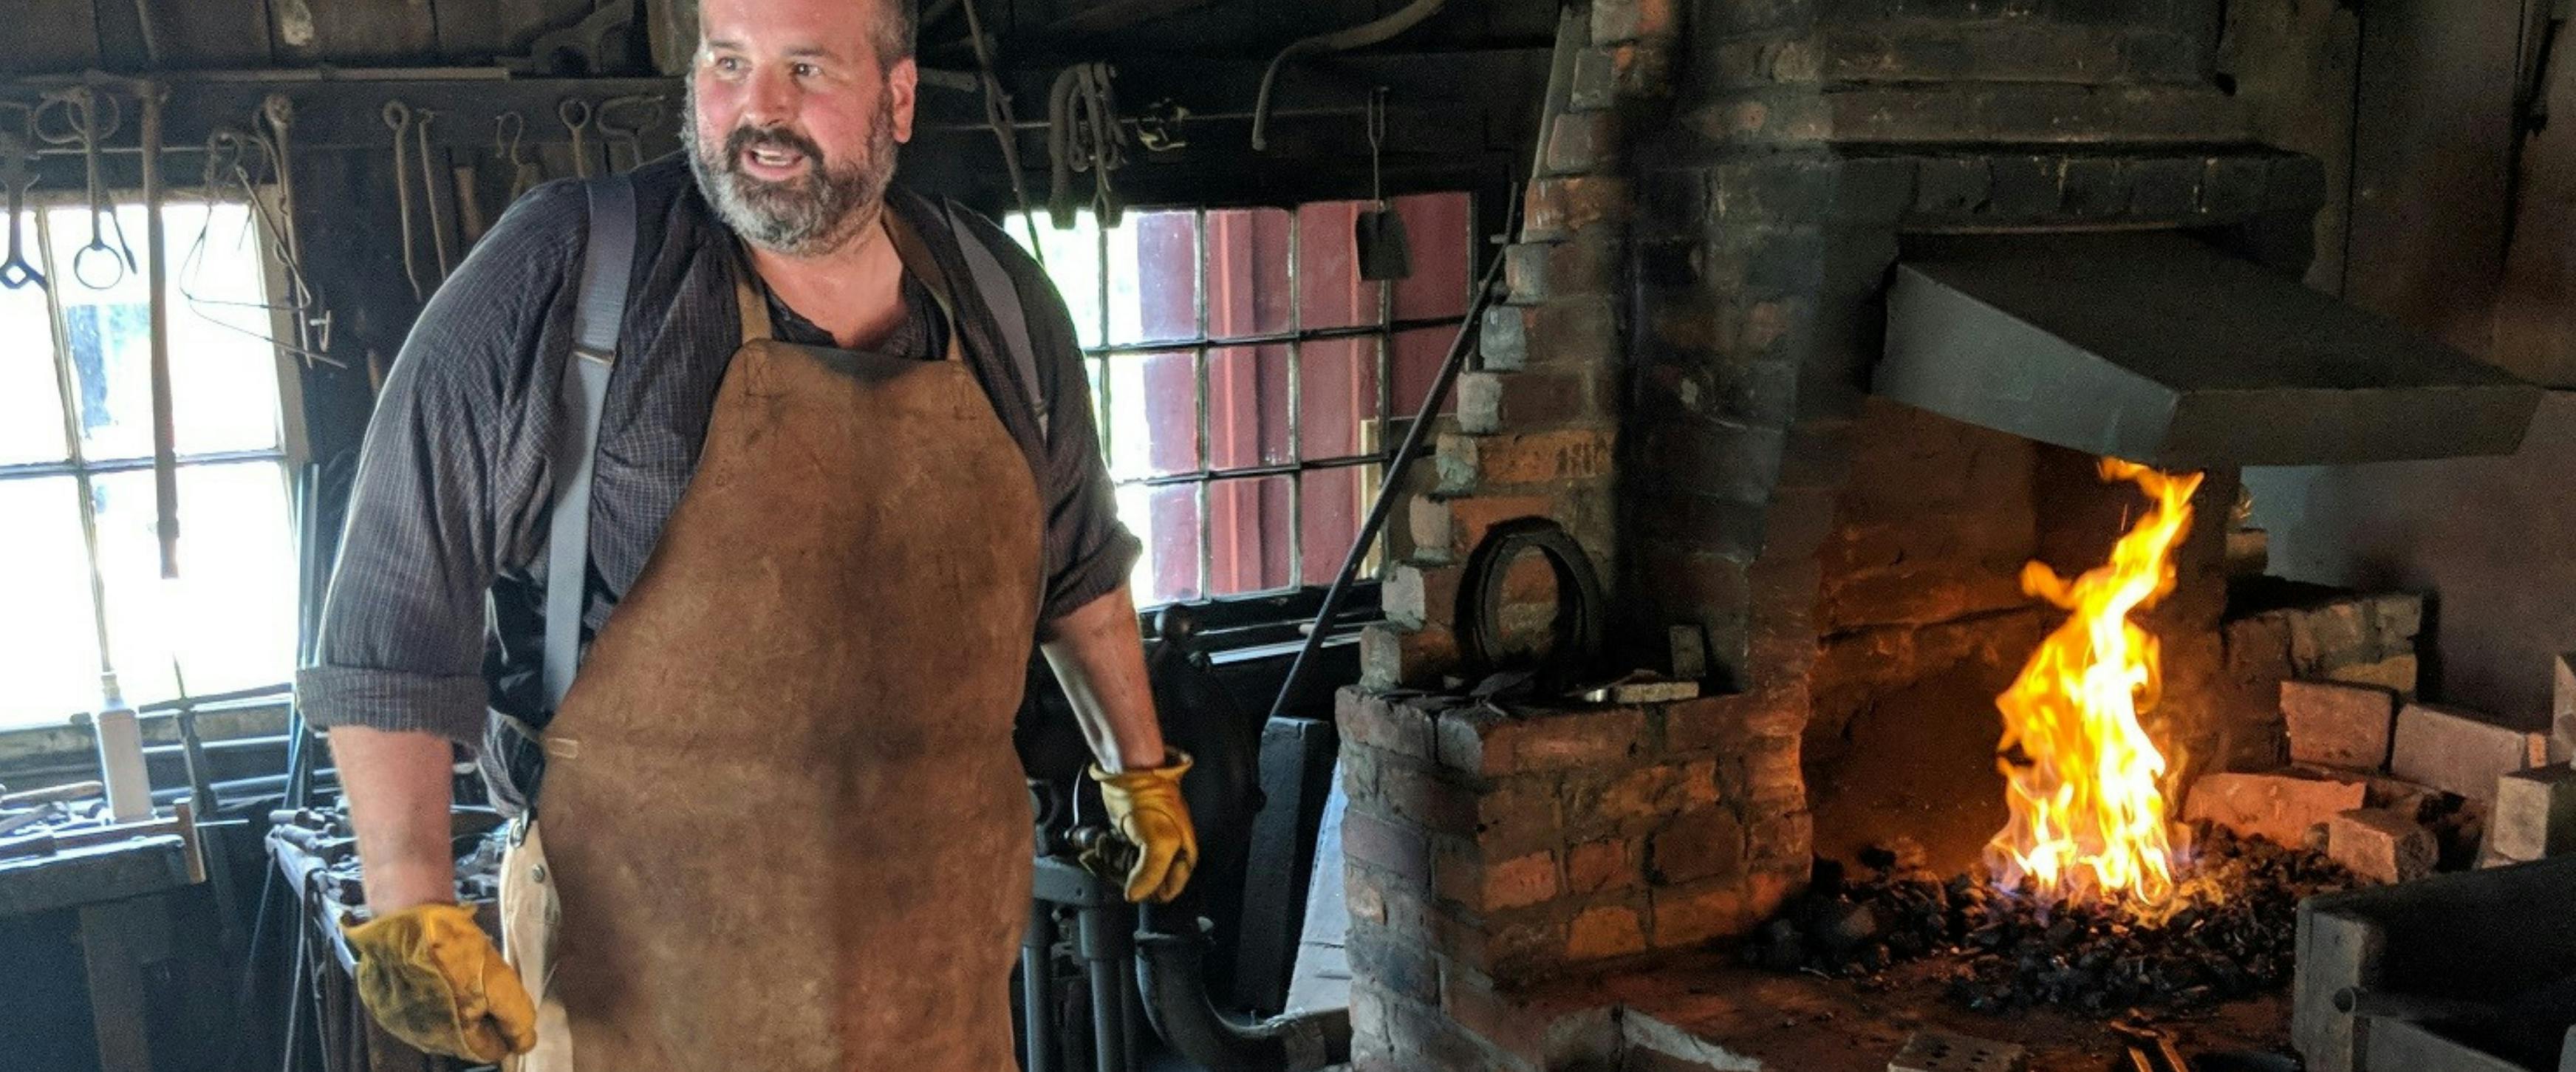 Volunteer Blacksmith working at the forge